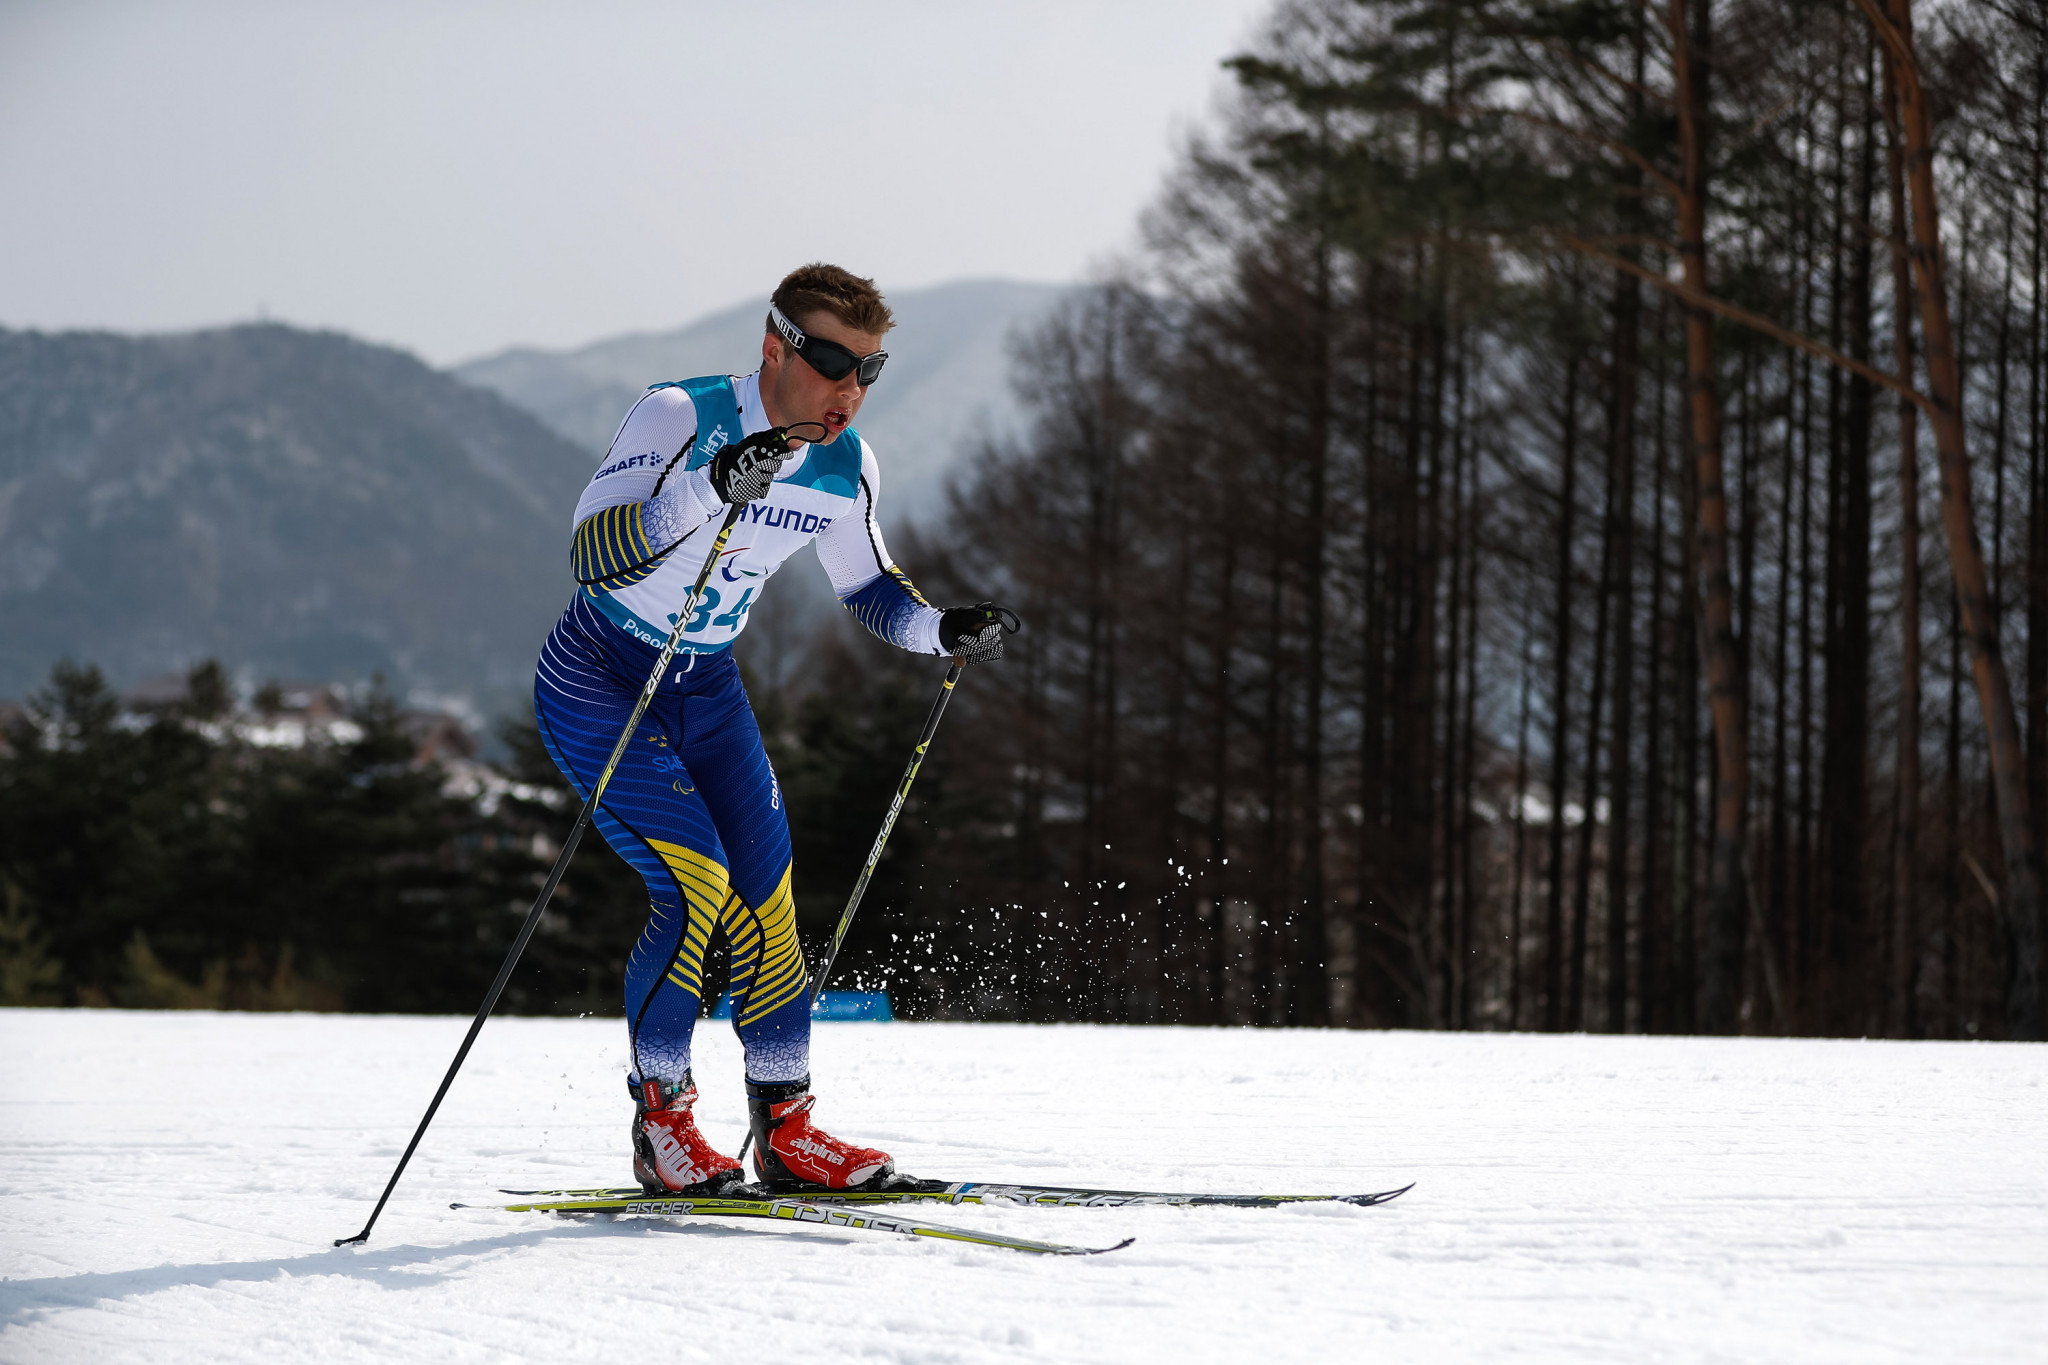 Modin triumphs in front of home crowd at World Para Nordic Skiing World